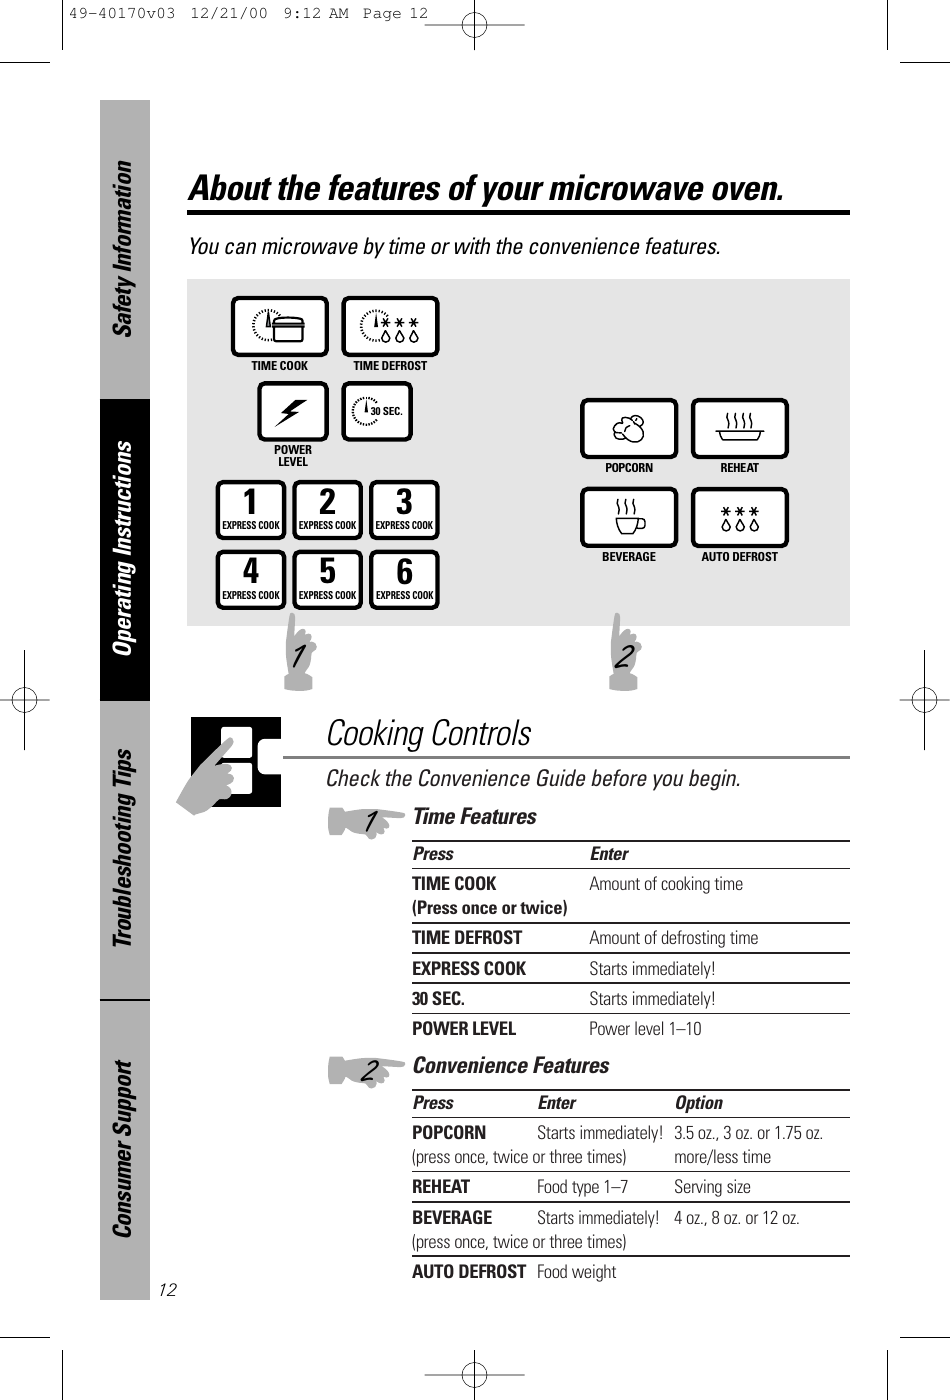 Check the Convenience Guide before you begin.Time FeaturesPress EnterTIME COOK Amount of cooking time(Press once or twice)TIME DEFROST Amount of defrosting timeEXPRESS COOK Starts immediately!30 SEC. Starts immediately!POWER LEVEL Power level 1–10Convenience FeaturesPress Enter OptionPOPCORN Starts immediately! 3.5 oz., 3 oz. or 1.75 oz.(press once, twice or three times) more/less timeREHEAT Food type 1–7 Serving sizeBEVERAGEStarts immediately!4 oz., 8 oz. or 12 oz.(press once, twice or three times)AUTO DEFROST Food weightAbout the features of your microwave oven.You can microwave by time or with the convenience features. TIME COOK TIME DEFROSTPOWERLEVEL30 SEC.POPCORN REHEATBEVERAGE AUTO DEFROST1EXPRESS COOK3EXPRESS COOK2EXPRESS COOK5EXPRESS COOK6EXPRESS COOK4EXPRESS COOKCooking Controls121 2Safety InformationOperating InstructionsTroubleshooting TipsConsumer Support1249-40170v03  12/21/00  9:12 AM  Page 12